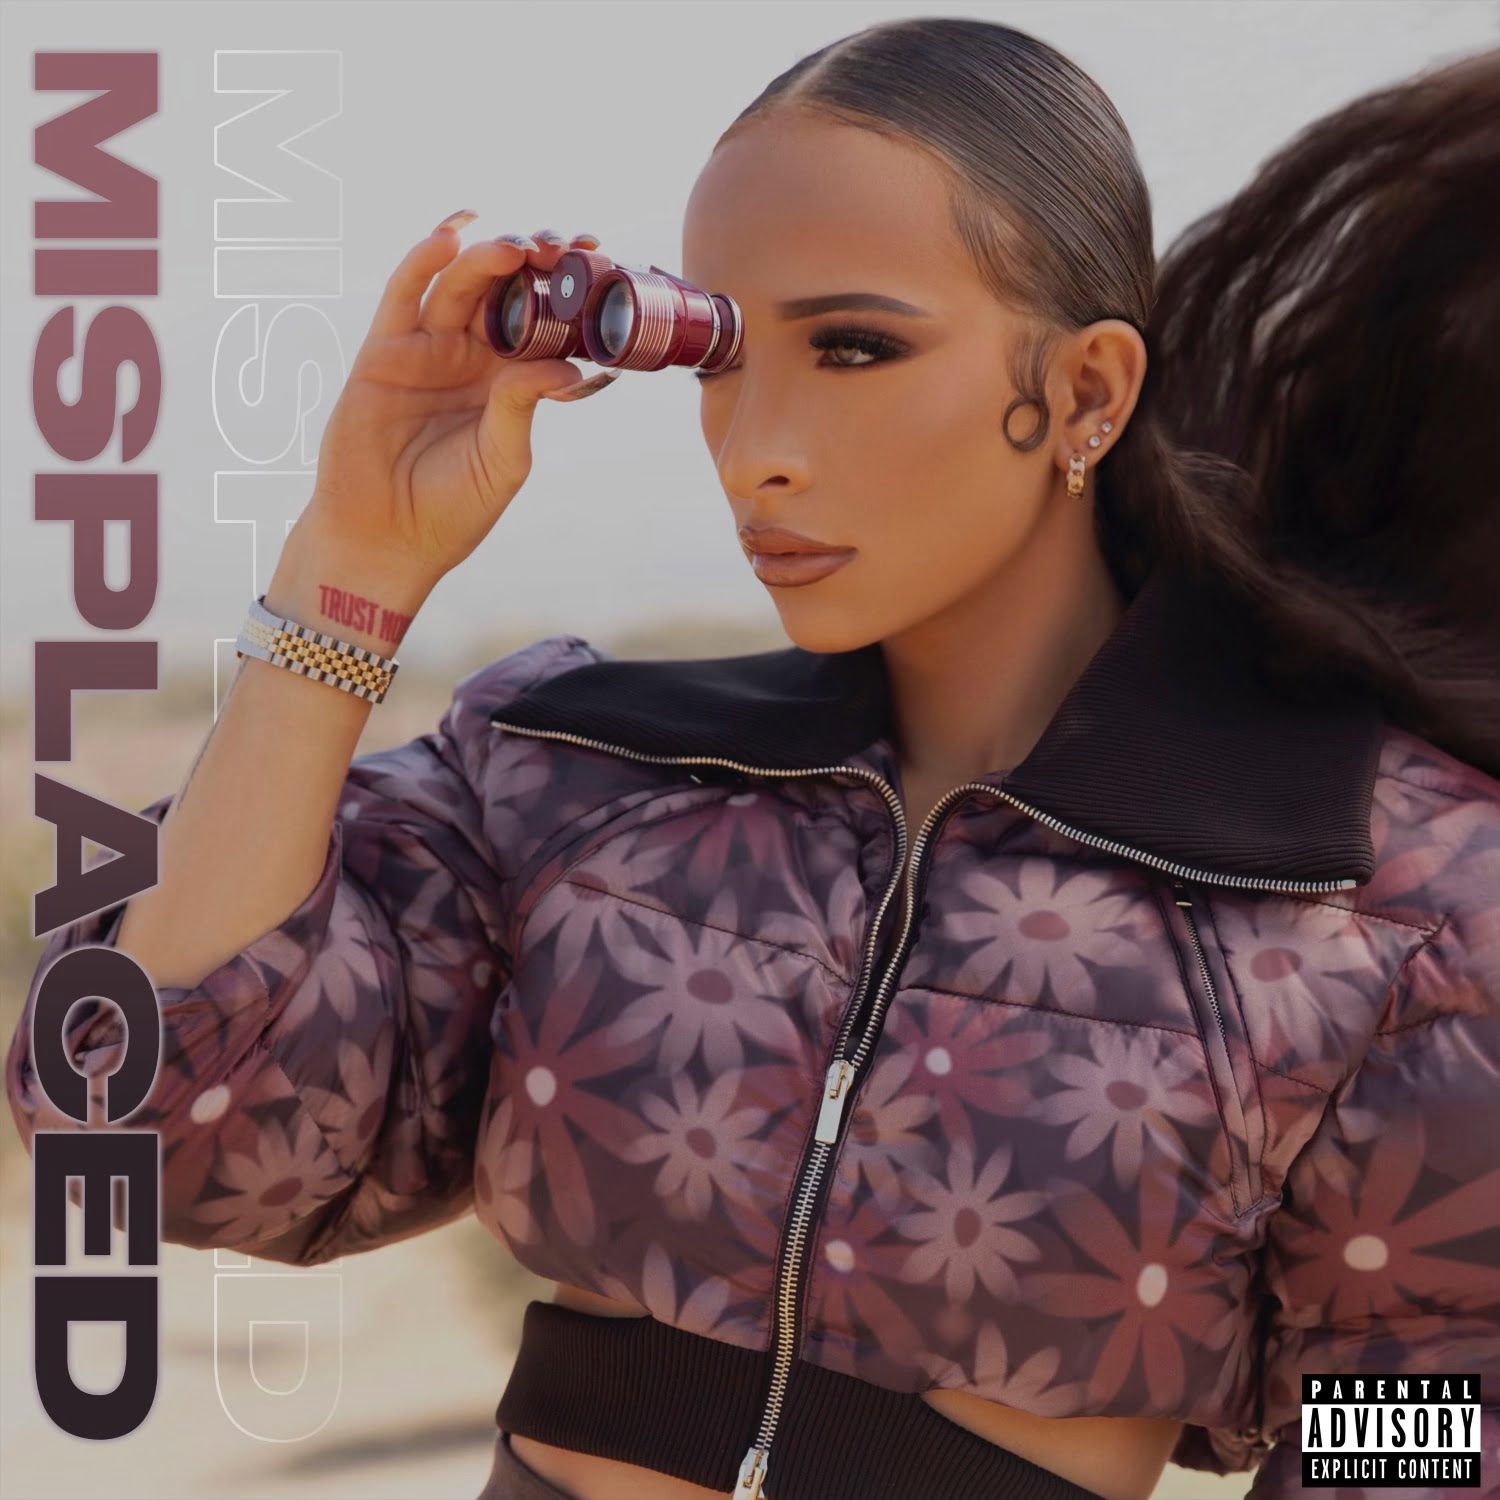 Kendy X Misplaced via The Thom Brand for use by 360 Magazine